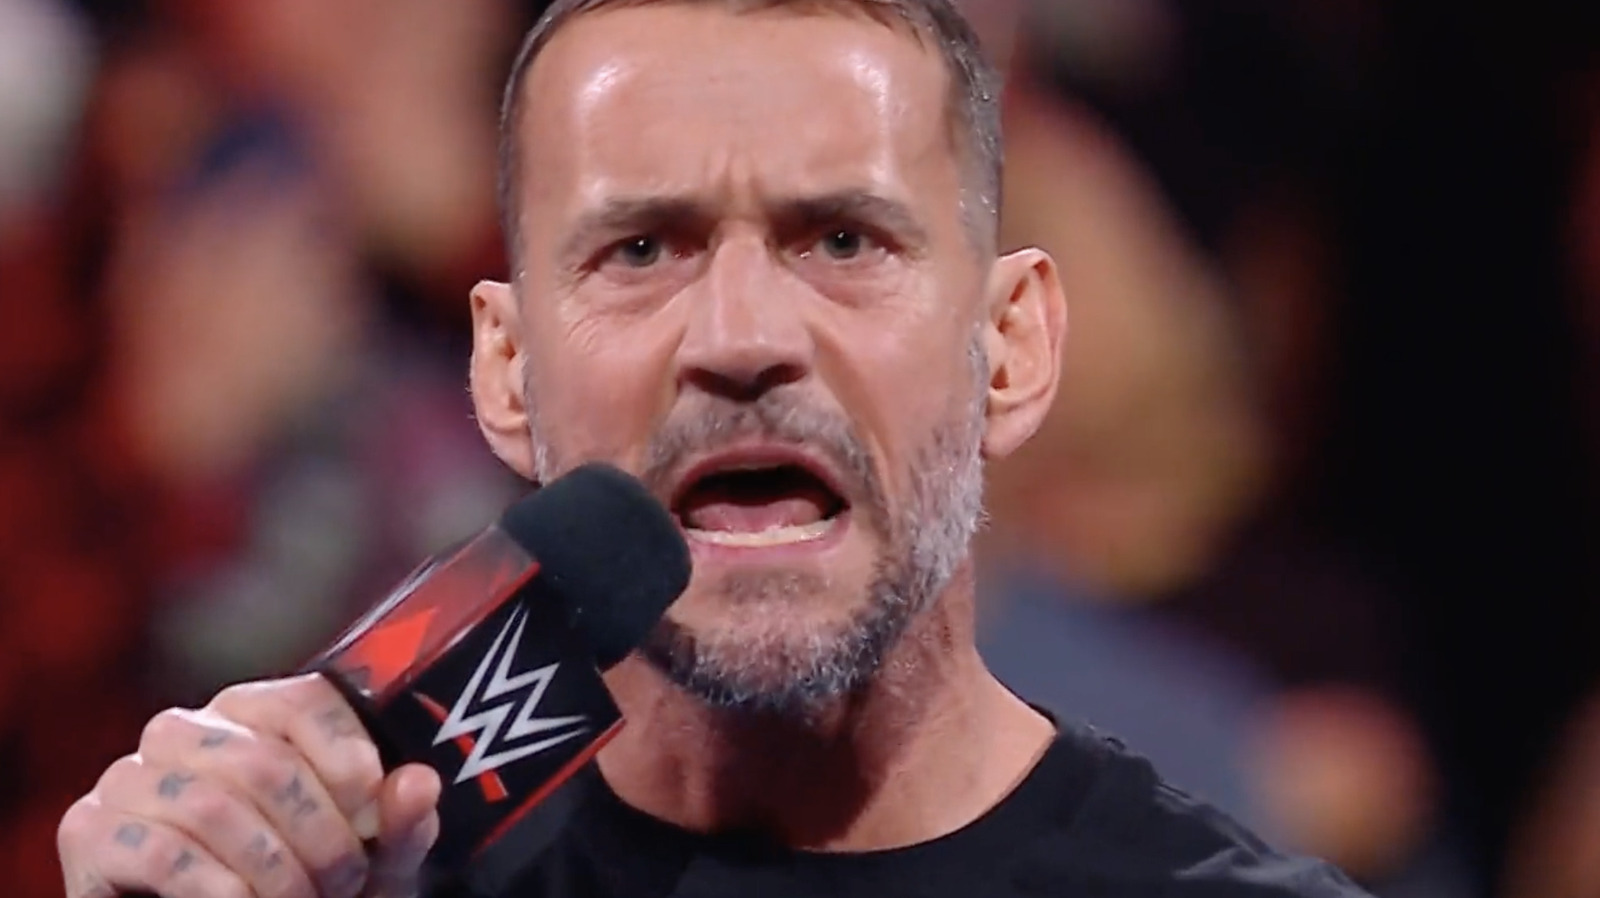 CM Punk On Returning To WWE In Raw Promo Segment: 'I'm Home'